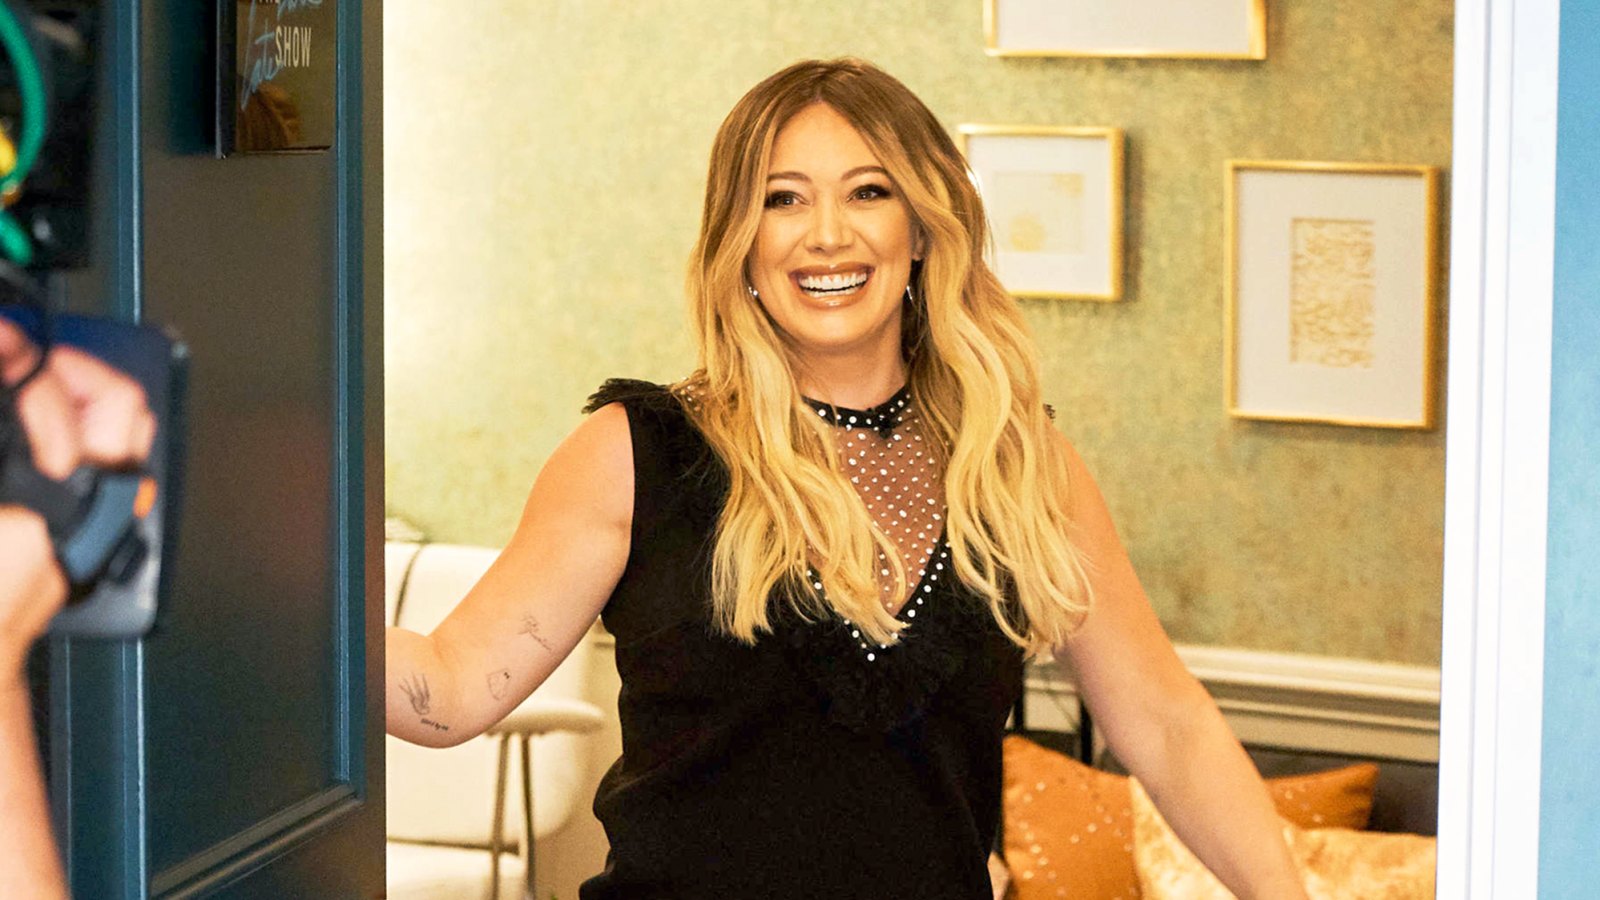 Hilary Duff on ‘The Late Late Show with James Corden‘